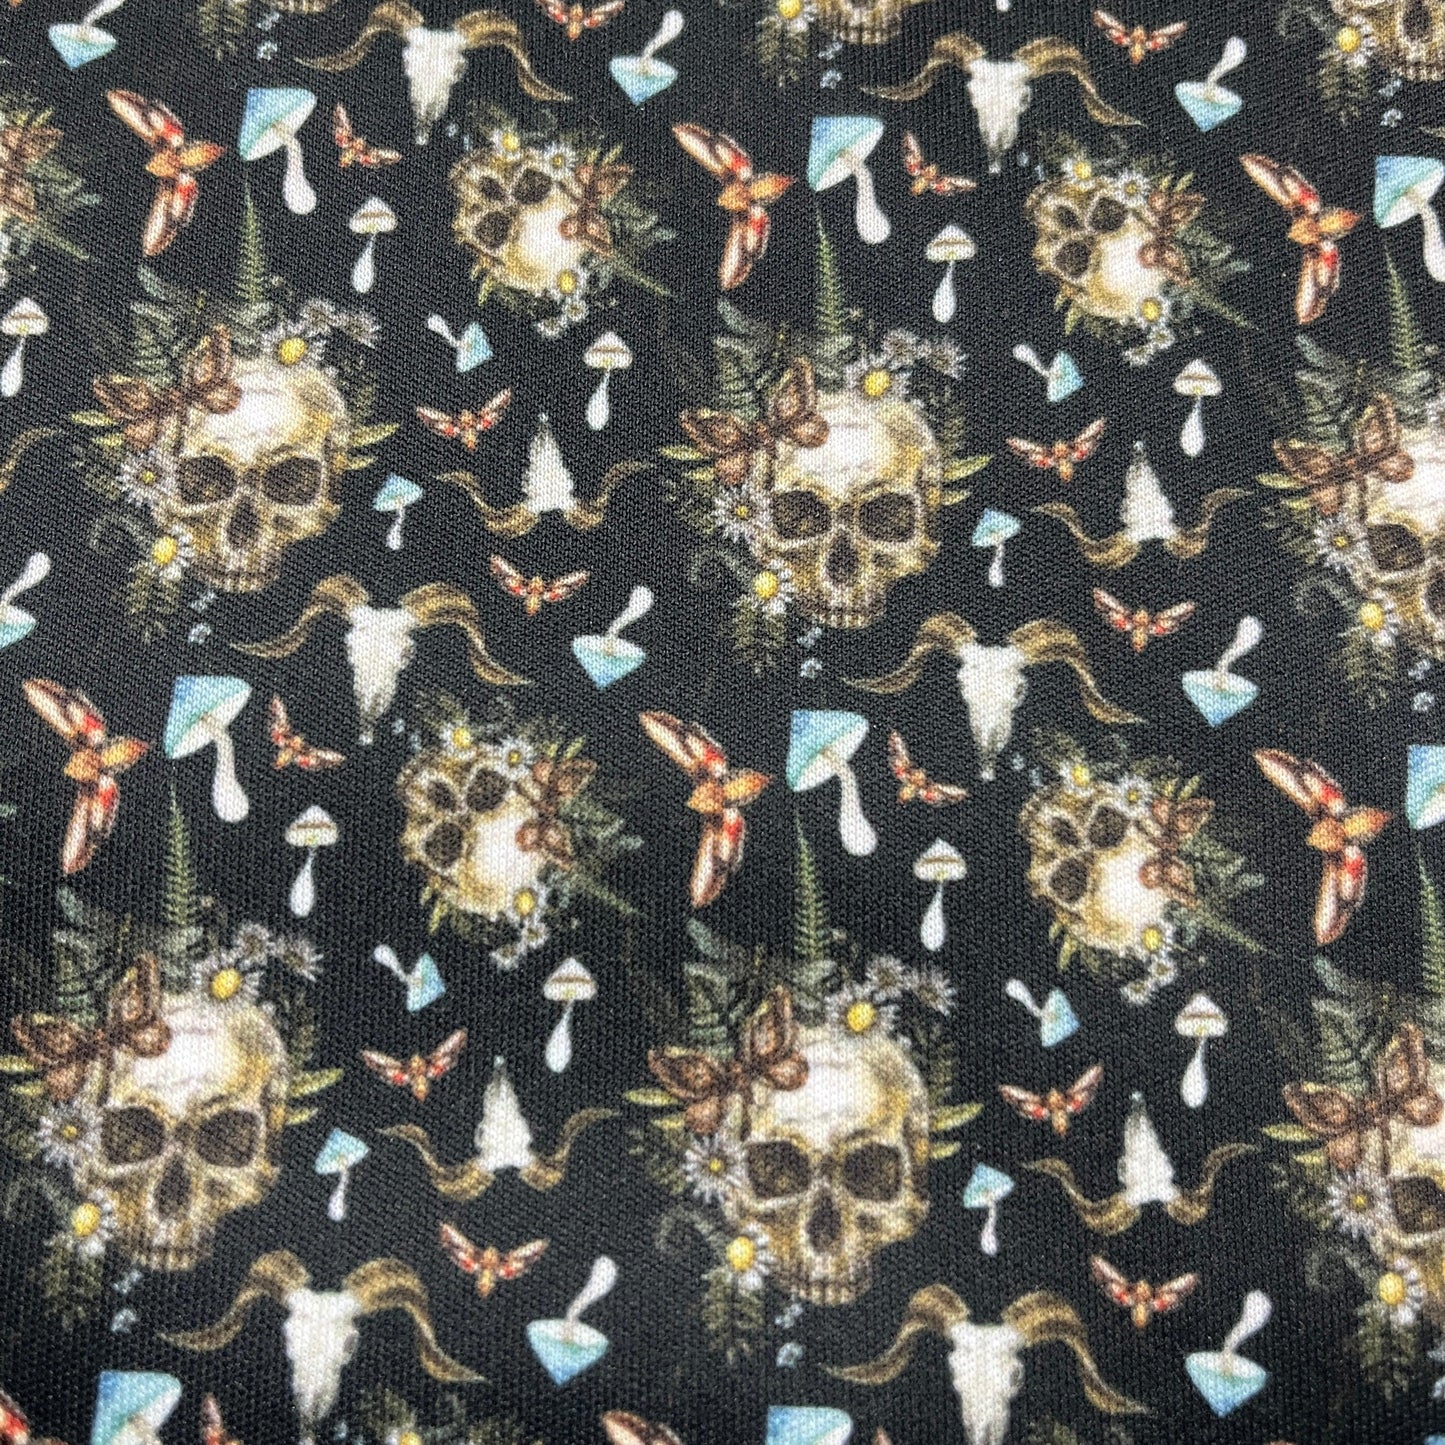 Skull Forest 1 mil PUL Fabric - Made in the USA - Nature's Fabrics